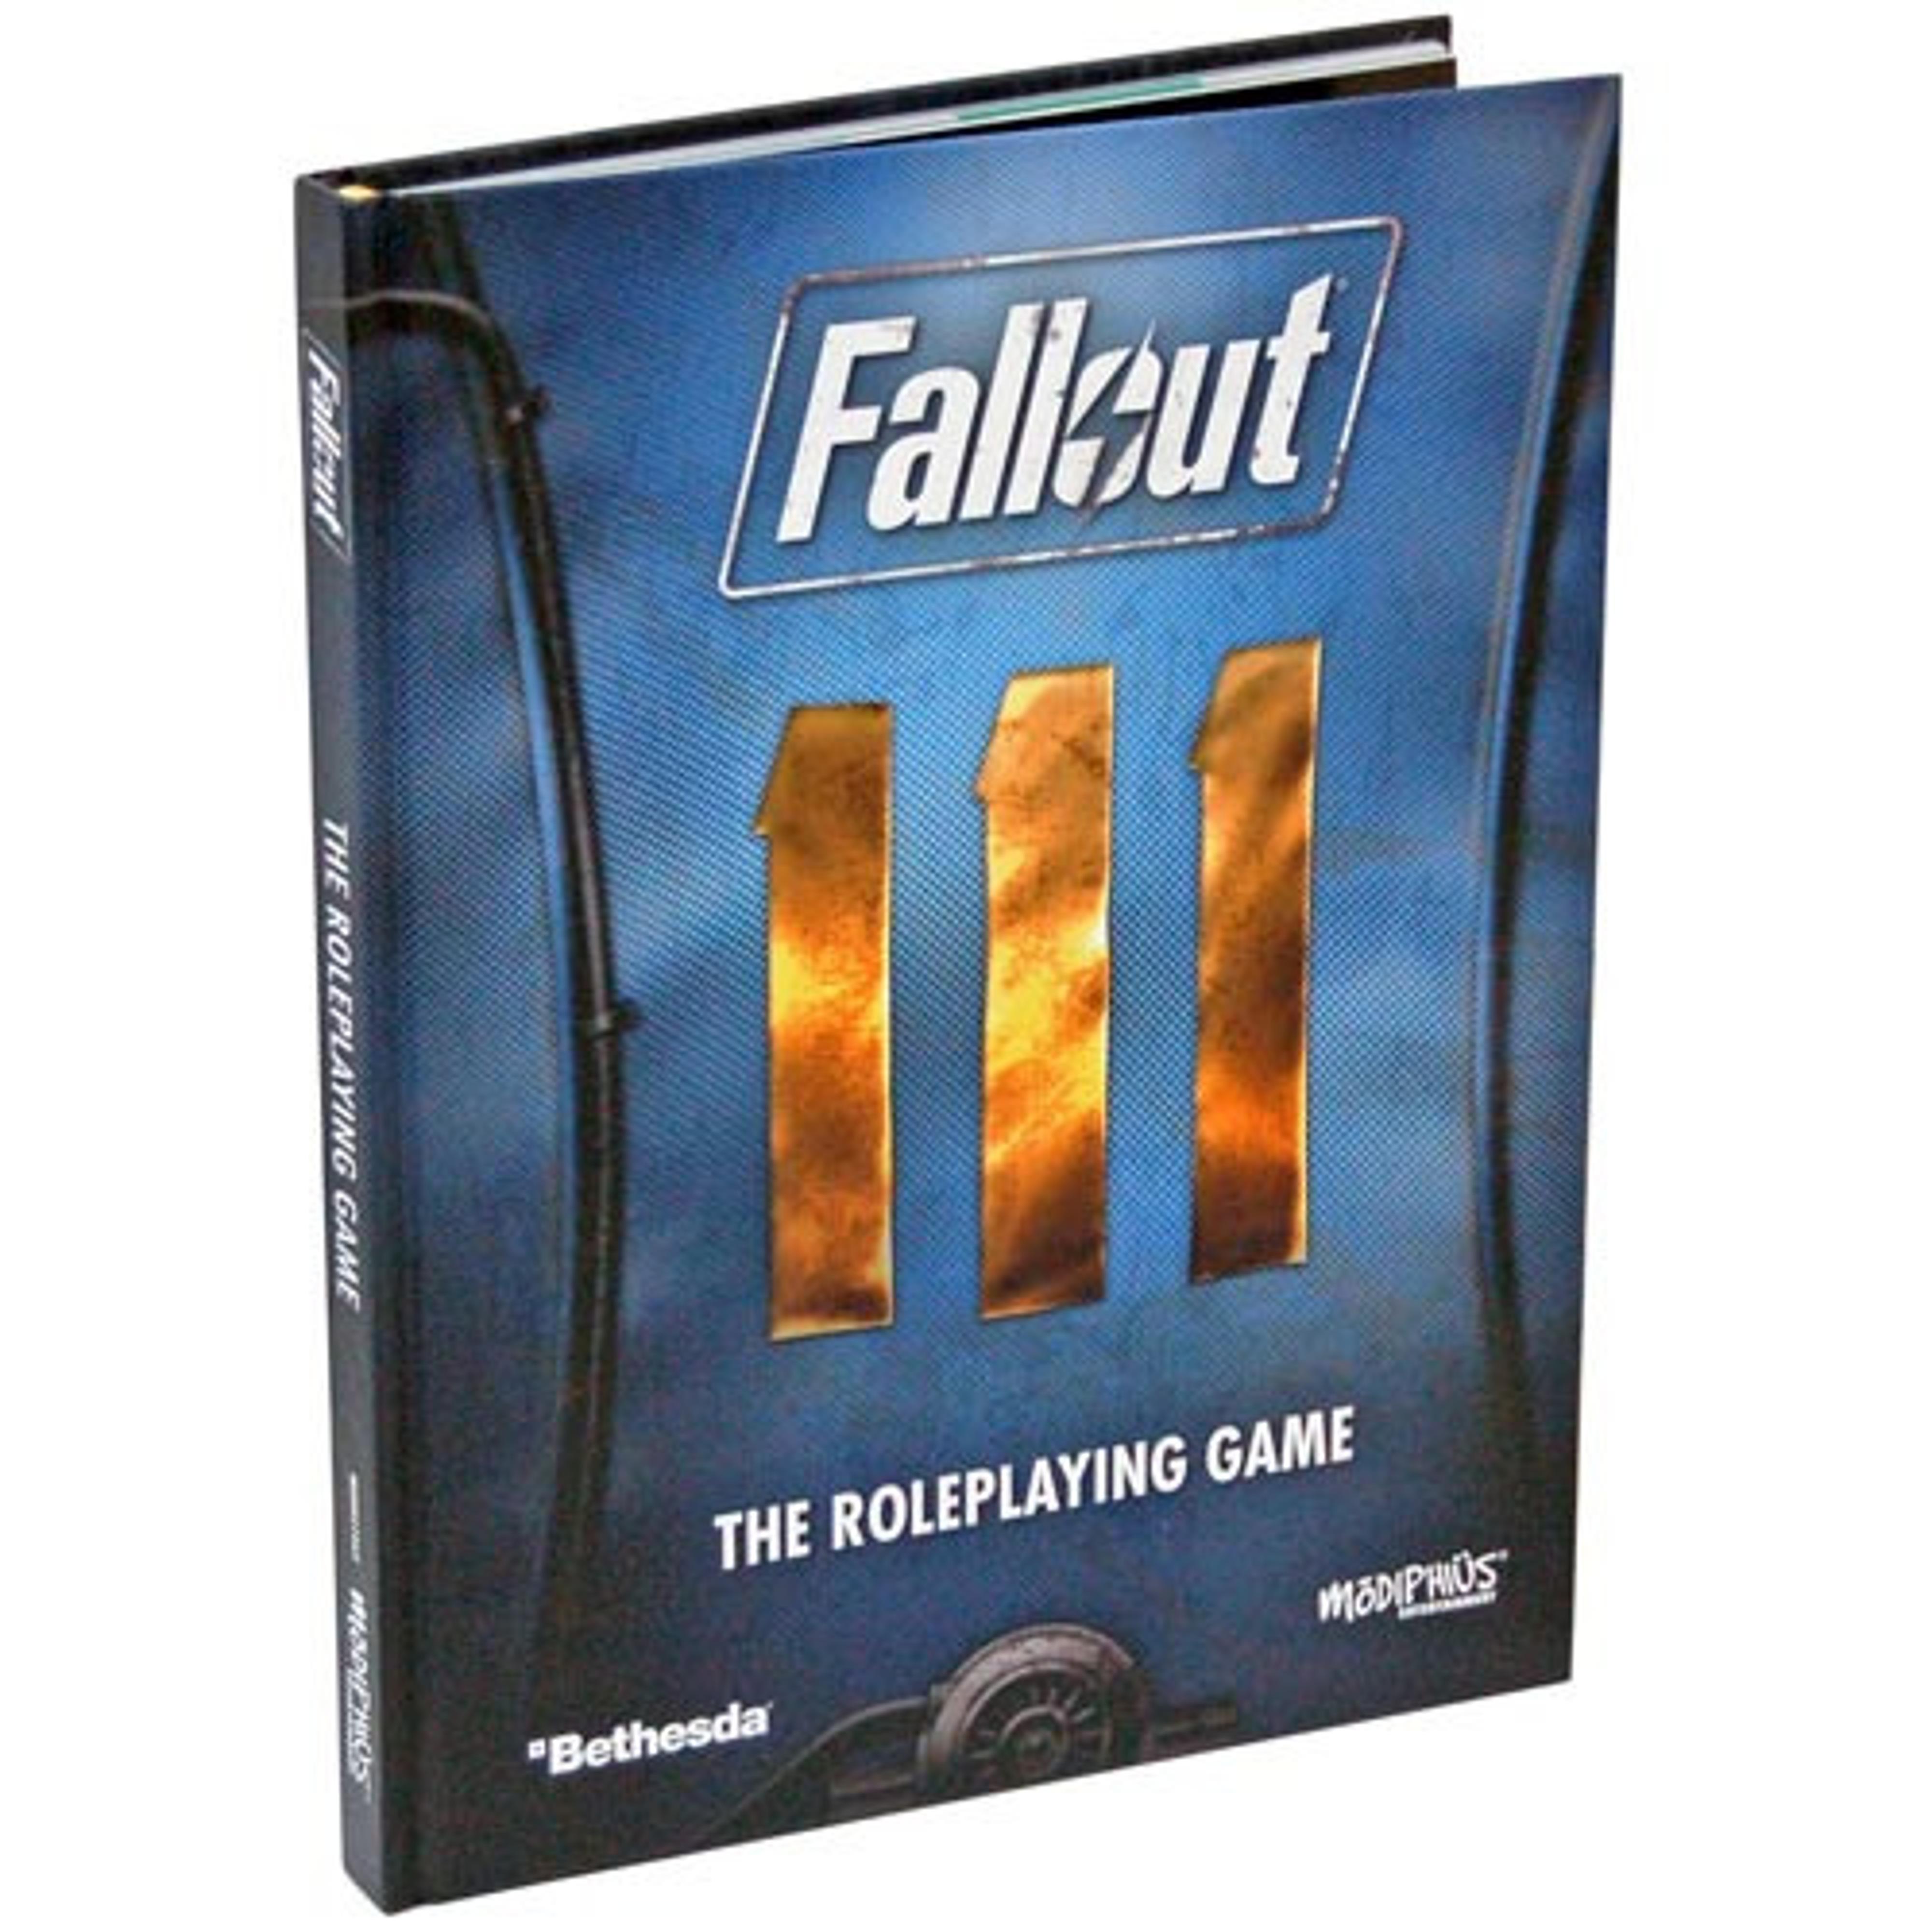 MODIPHIUS - MUH052191 - FALLOUT RPG CORE RULE BOOK : Leisure Hours Hobbies